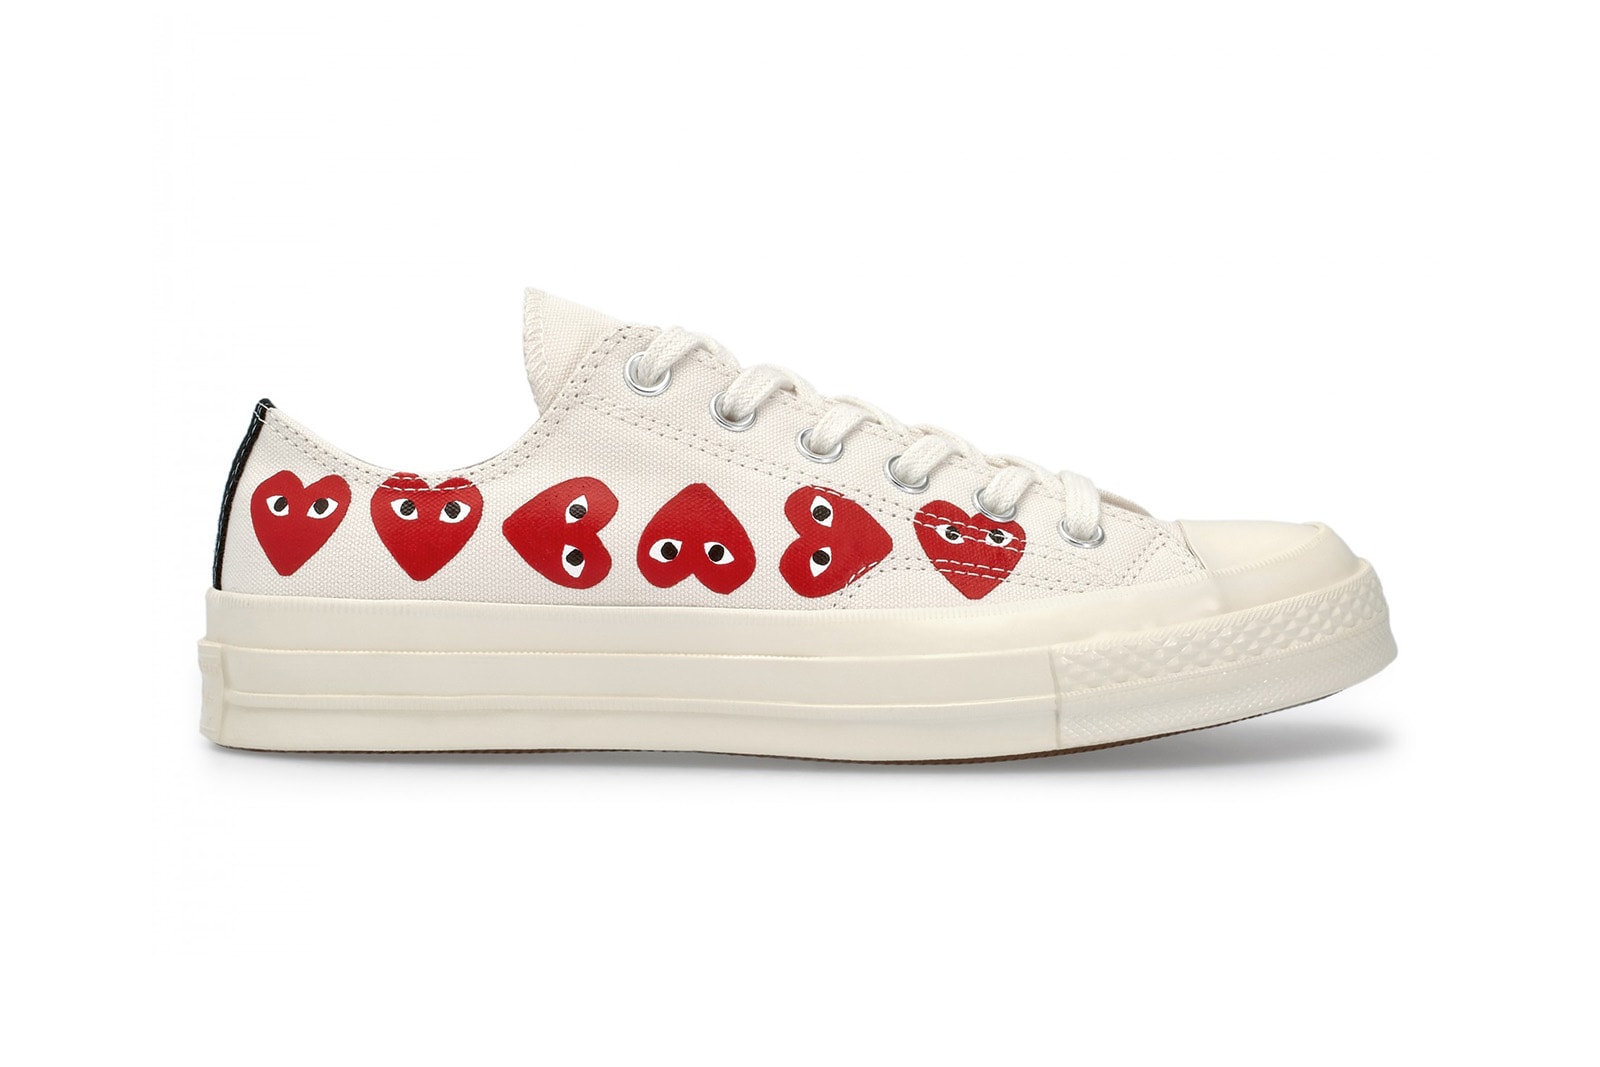 CdG PLAY x Converse Chuck Taylor All Star Release Date Details Shoes Trainers Kicks Sneakers Boots Footwear Cop Purchase Buy Soon Available Dover Street Market London White Khaki Repeated Heart Pattern